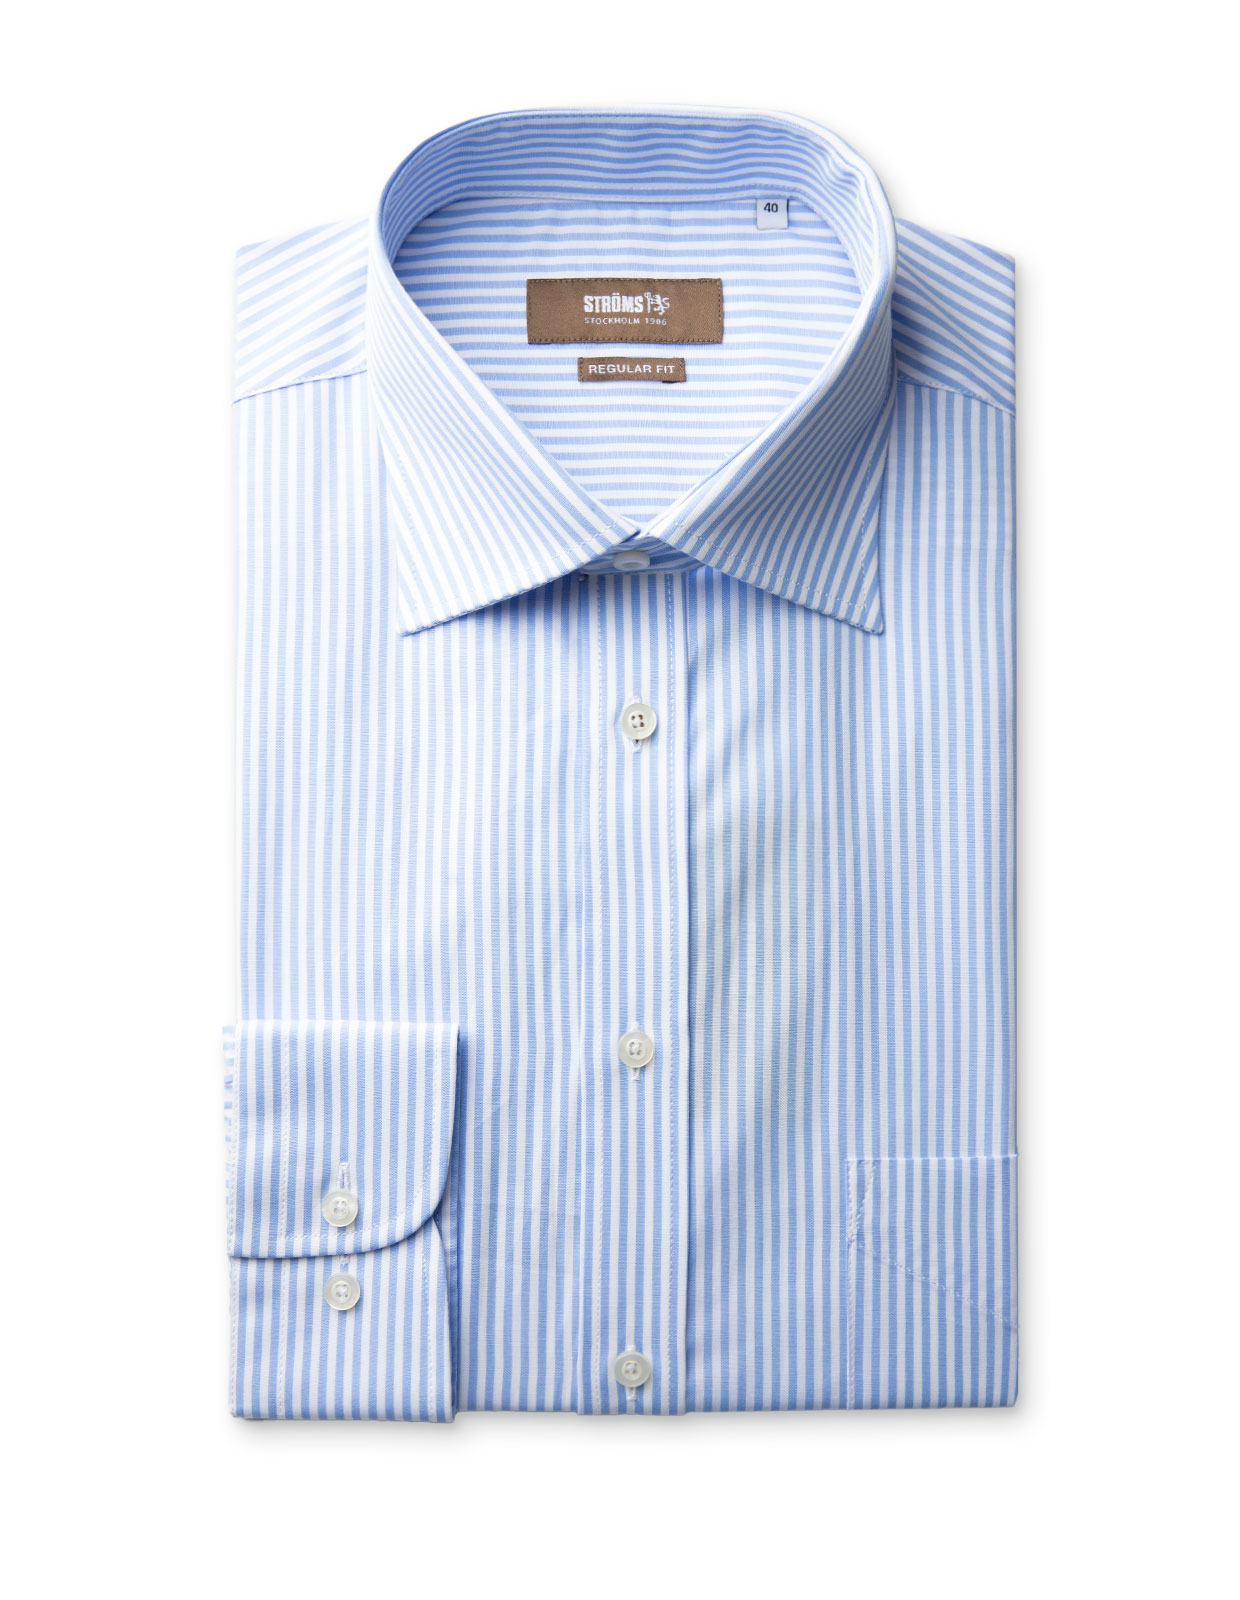 Regular Fit Extra Long Sleeves Striped Cotton Shirt Blue/White